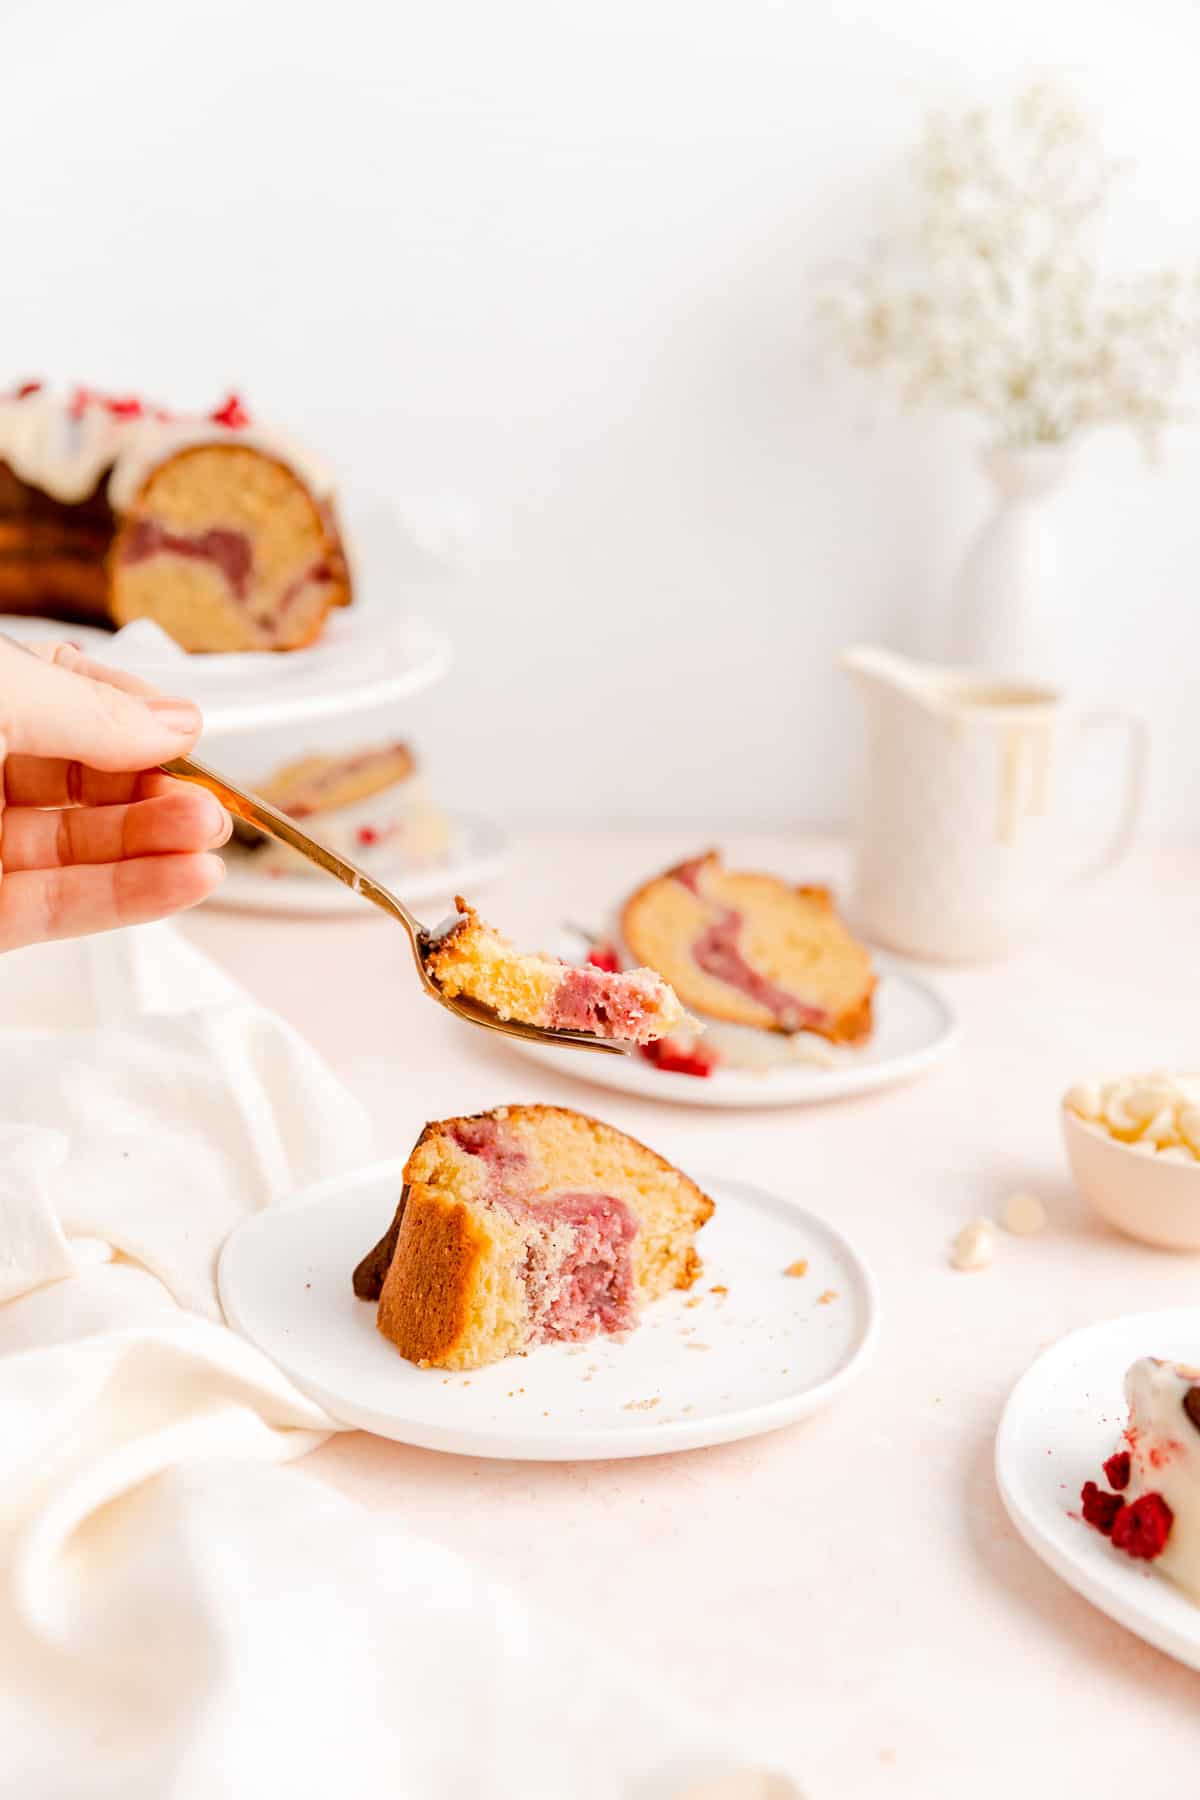 Hand holding bite of white chocolate raspberry Bundt cake on fork with plated slices on table.